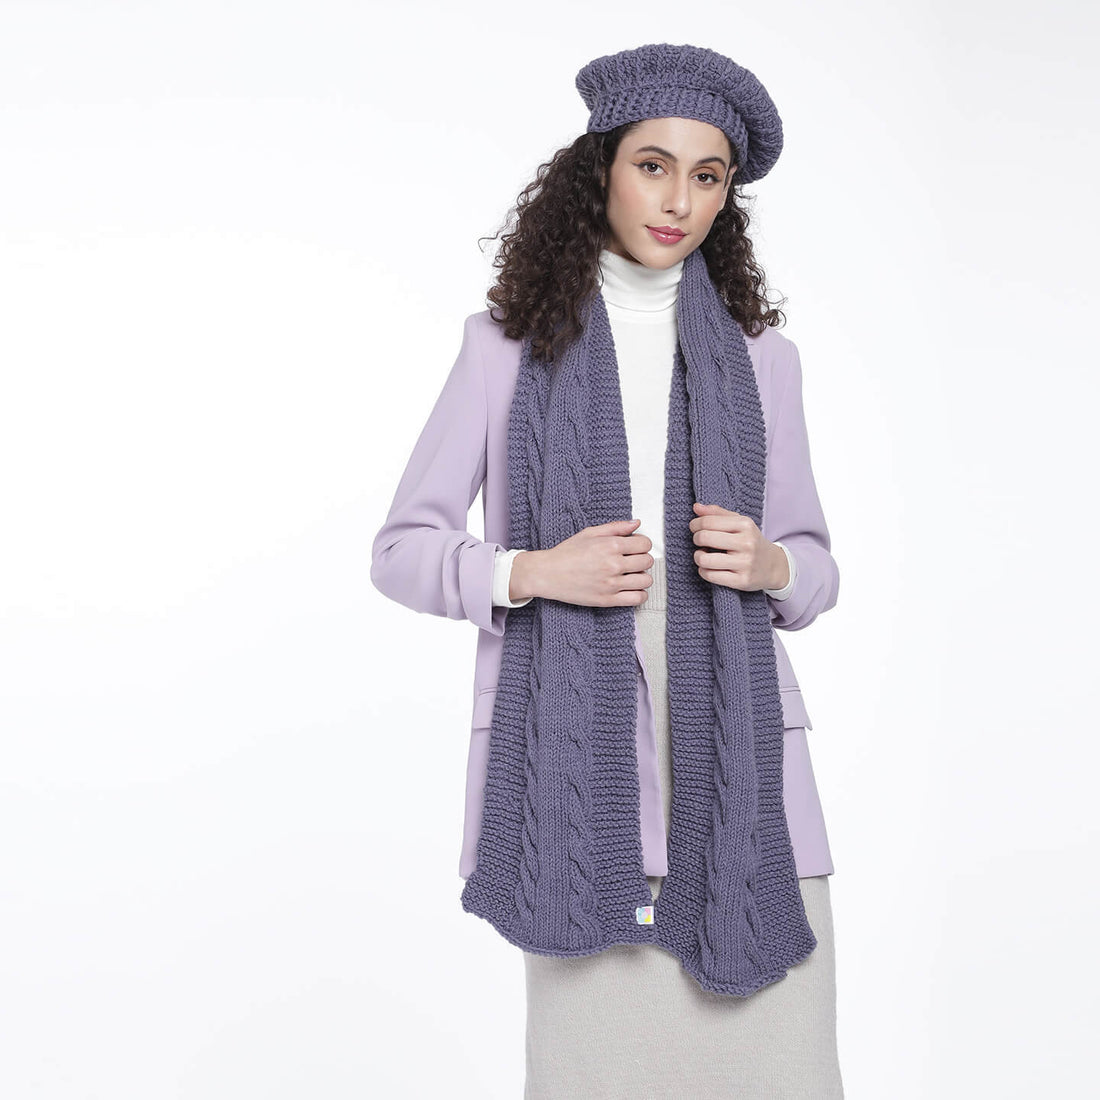 Beanie and Scarf Coordinating Set - 3218